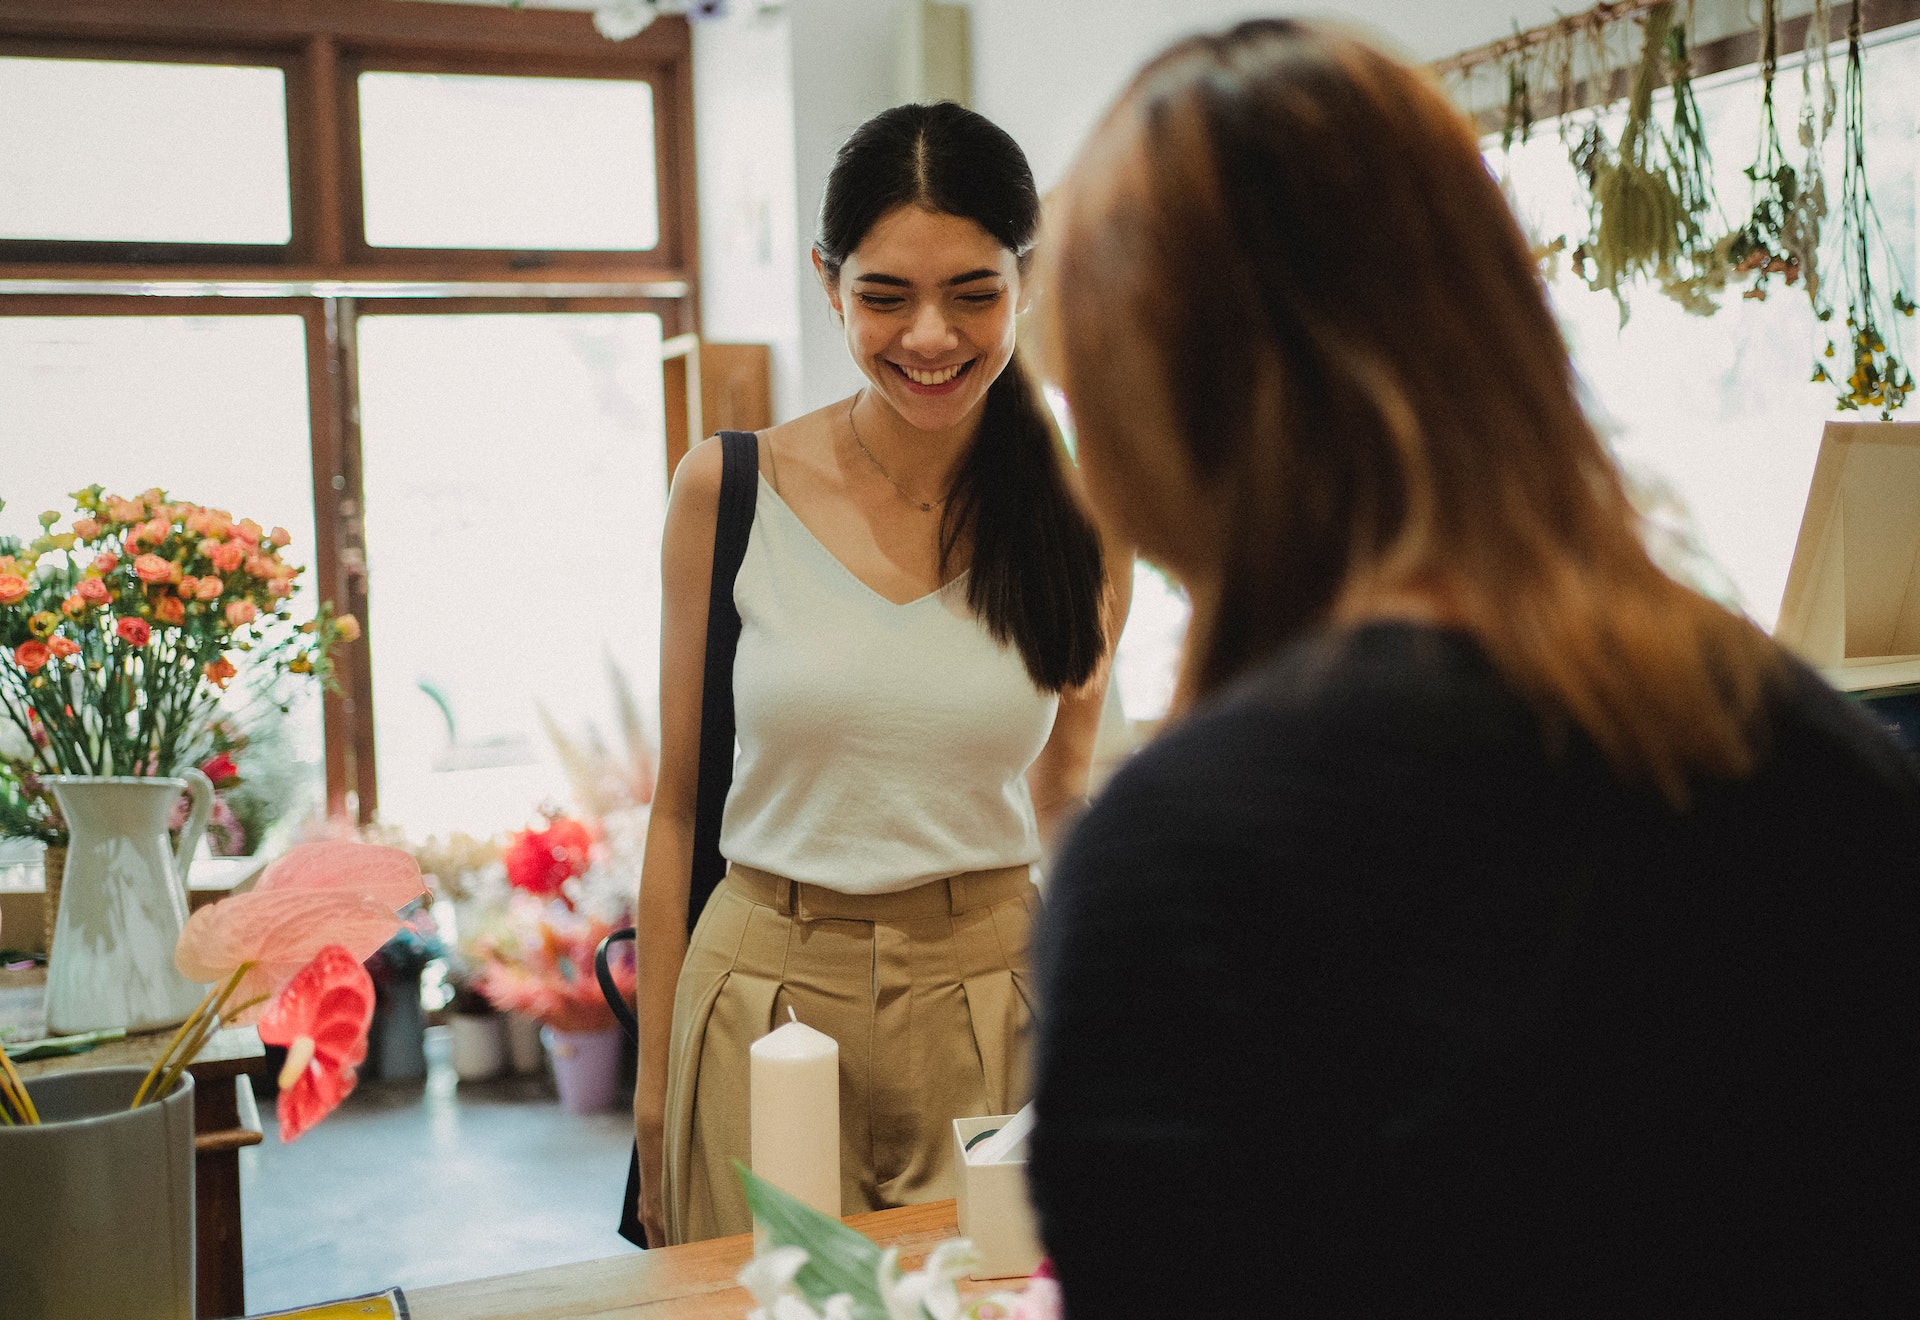 A smiling customer experiencing emotional buying as she happily interacts with a salesperson at a warmly lit, cozy flower shop.